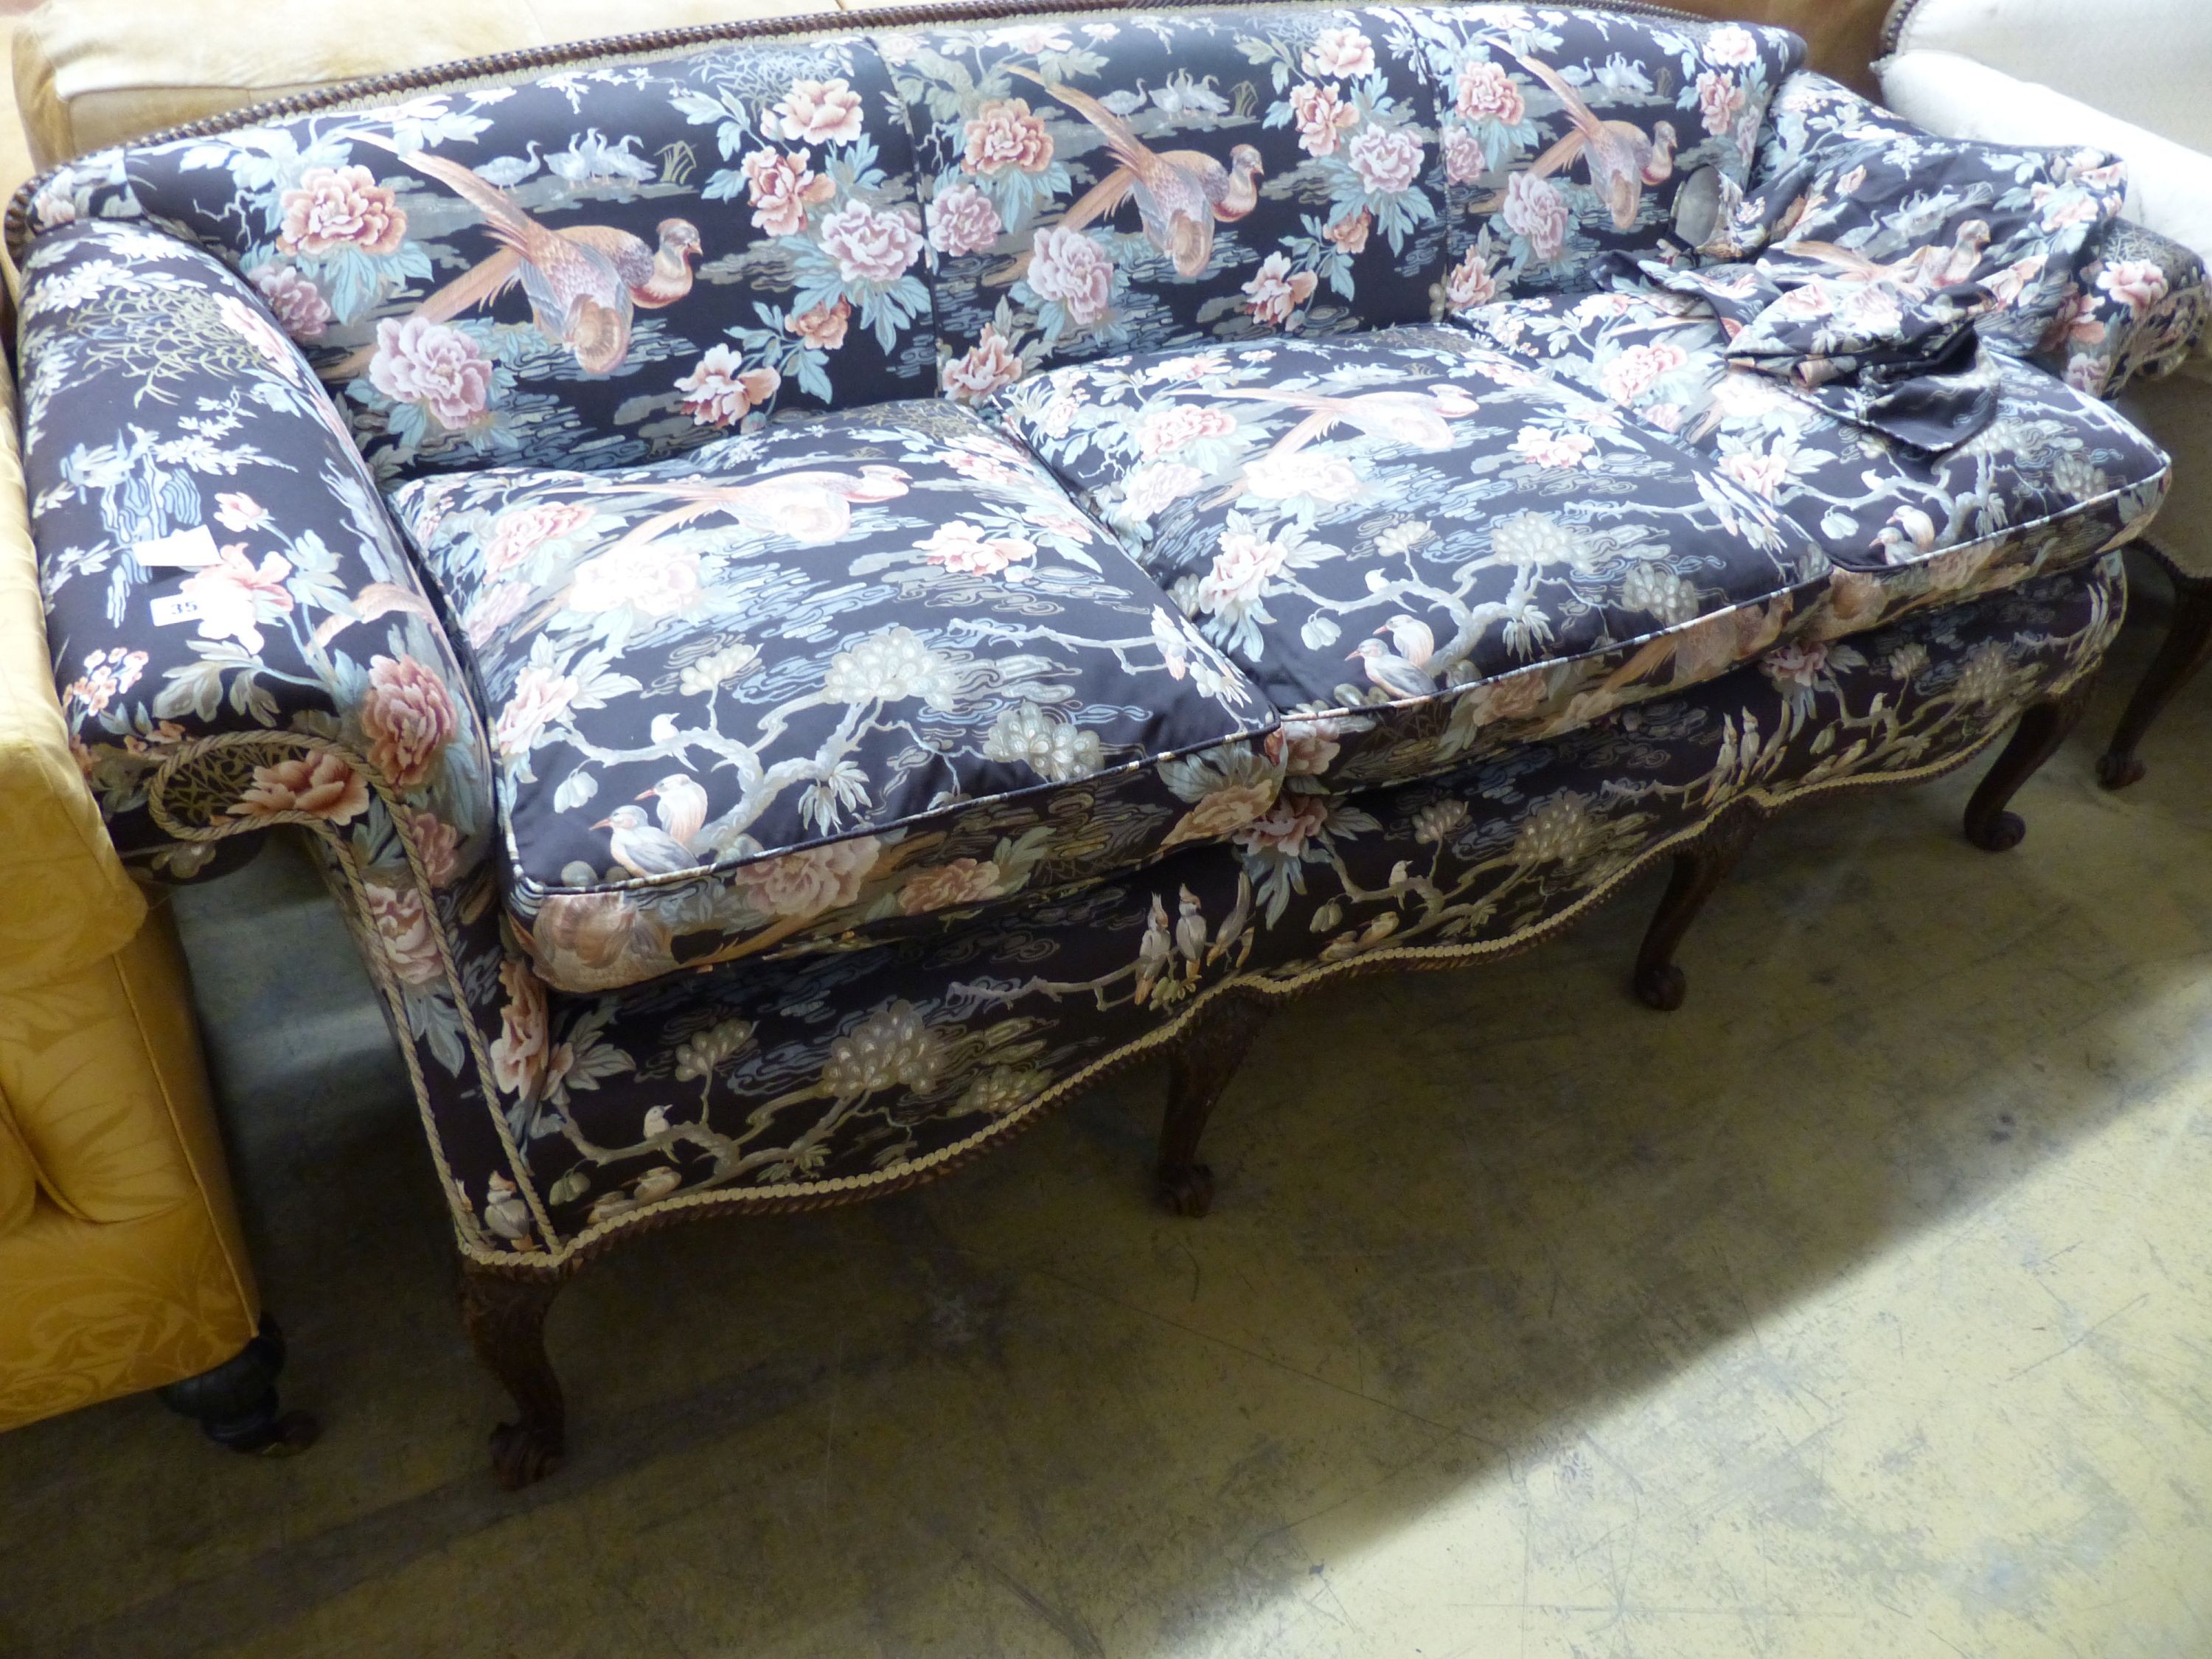 A late 19th century Continental mahogany scroll arm sofa and armchair, sofa upholstered in a floral fabric, on carved cabriole legs W 200 D 86 H 81 cms